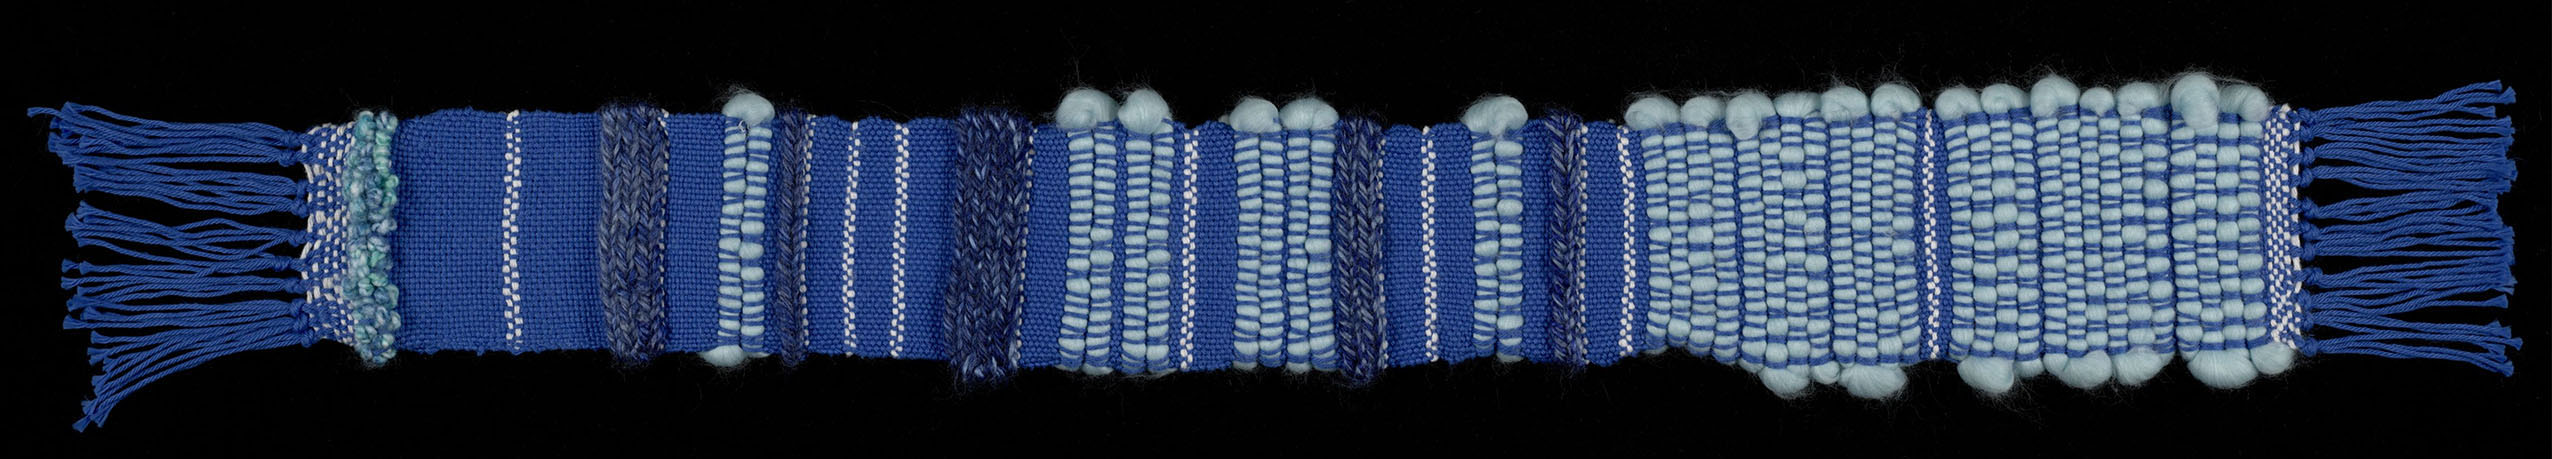 A blue scarf-like weaving with alternating bands of varied threads.